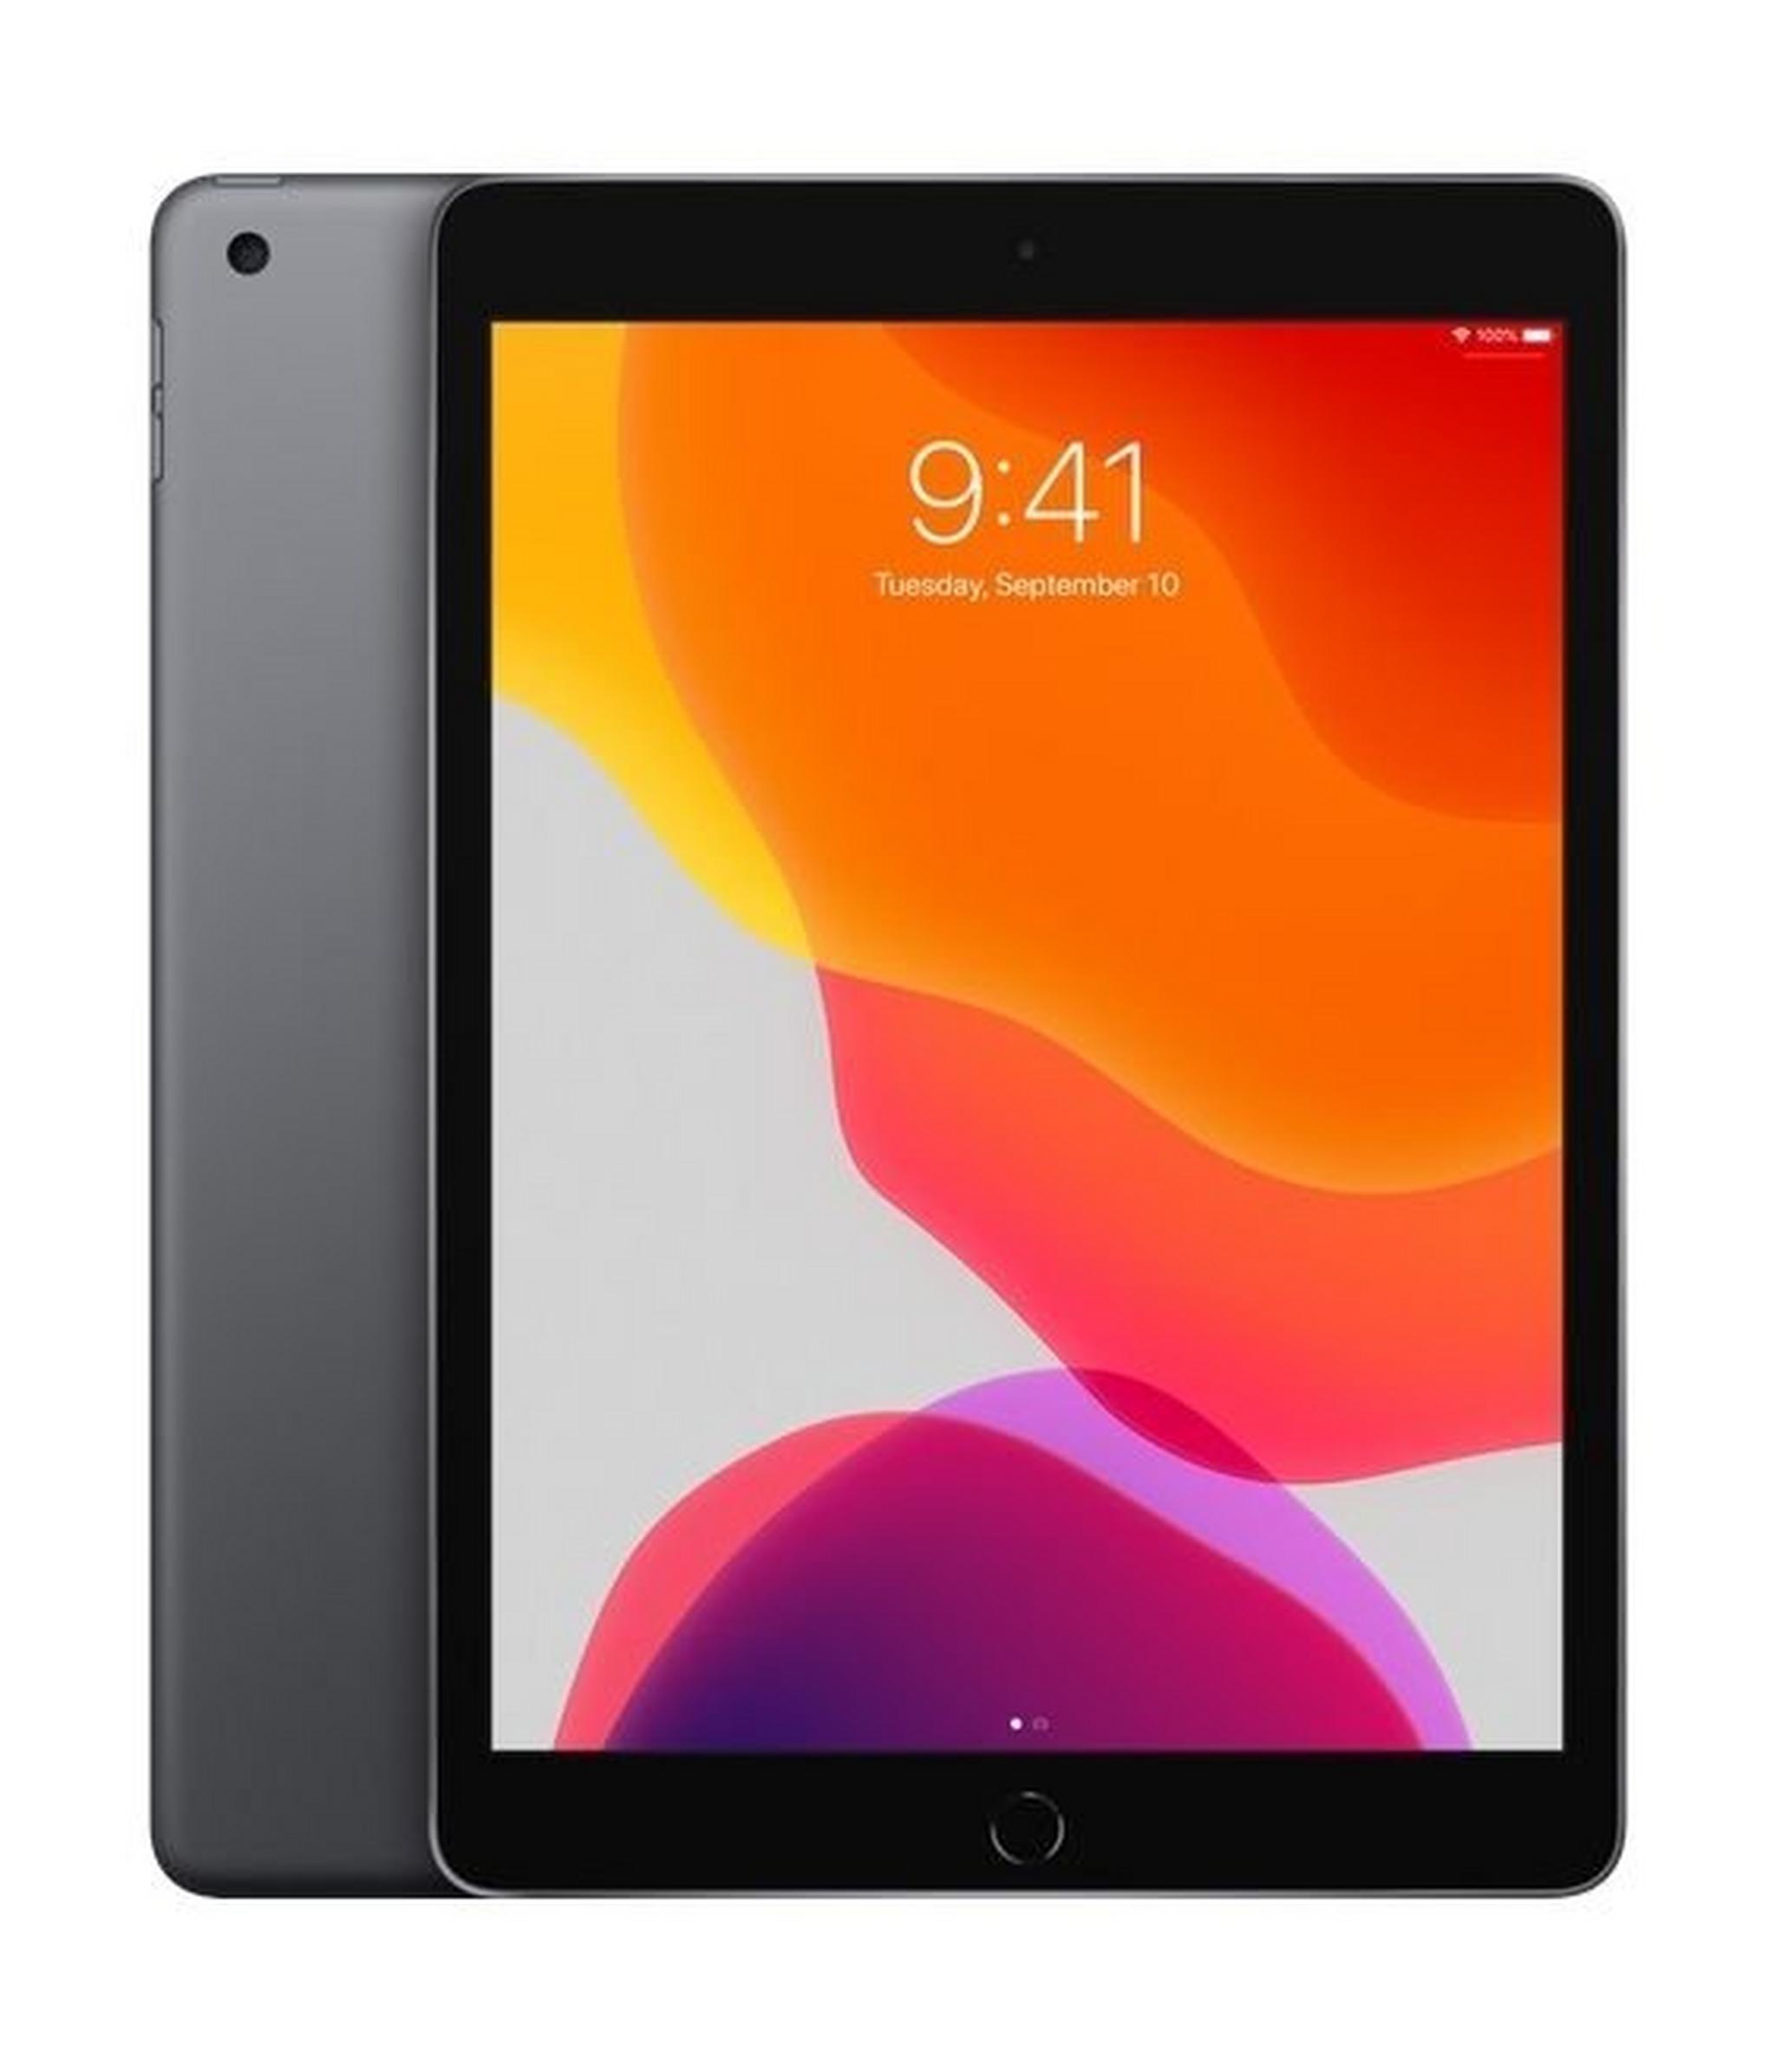 PRE-ORDER: Apple iPad 7 10.2-inch 32GB Wi-Fi Only Tablet - Space Grey